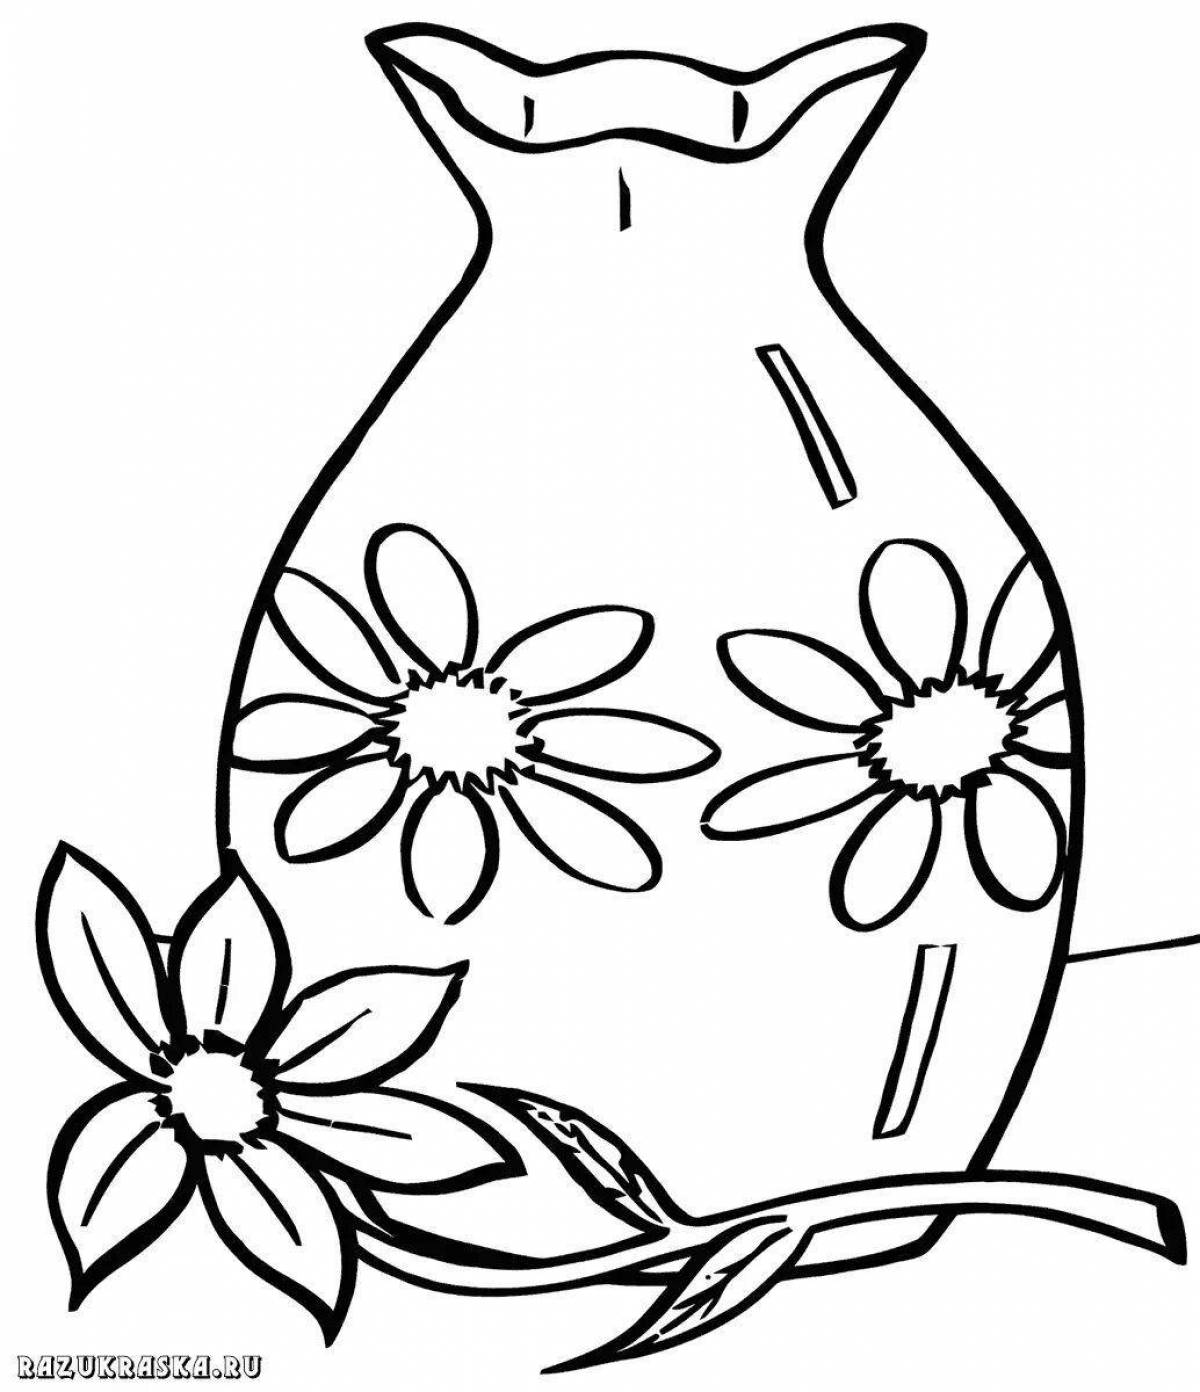 Charming vase coloring page